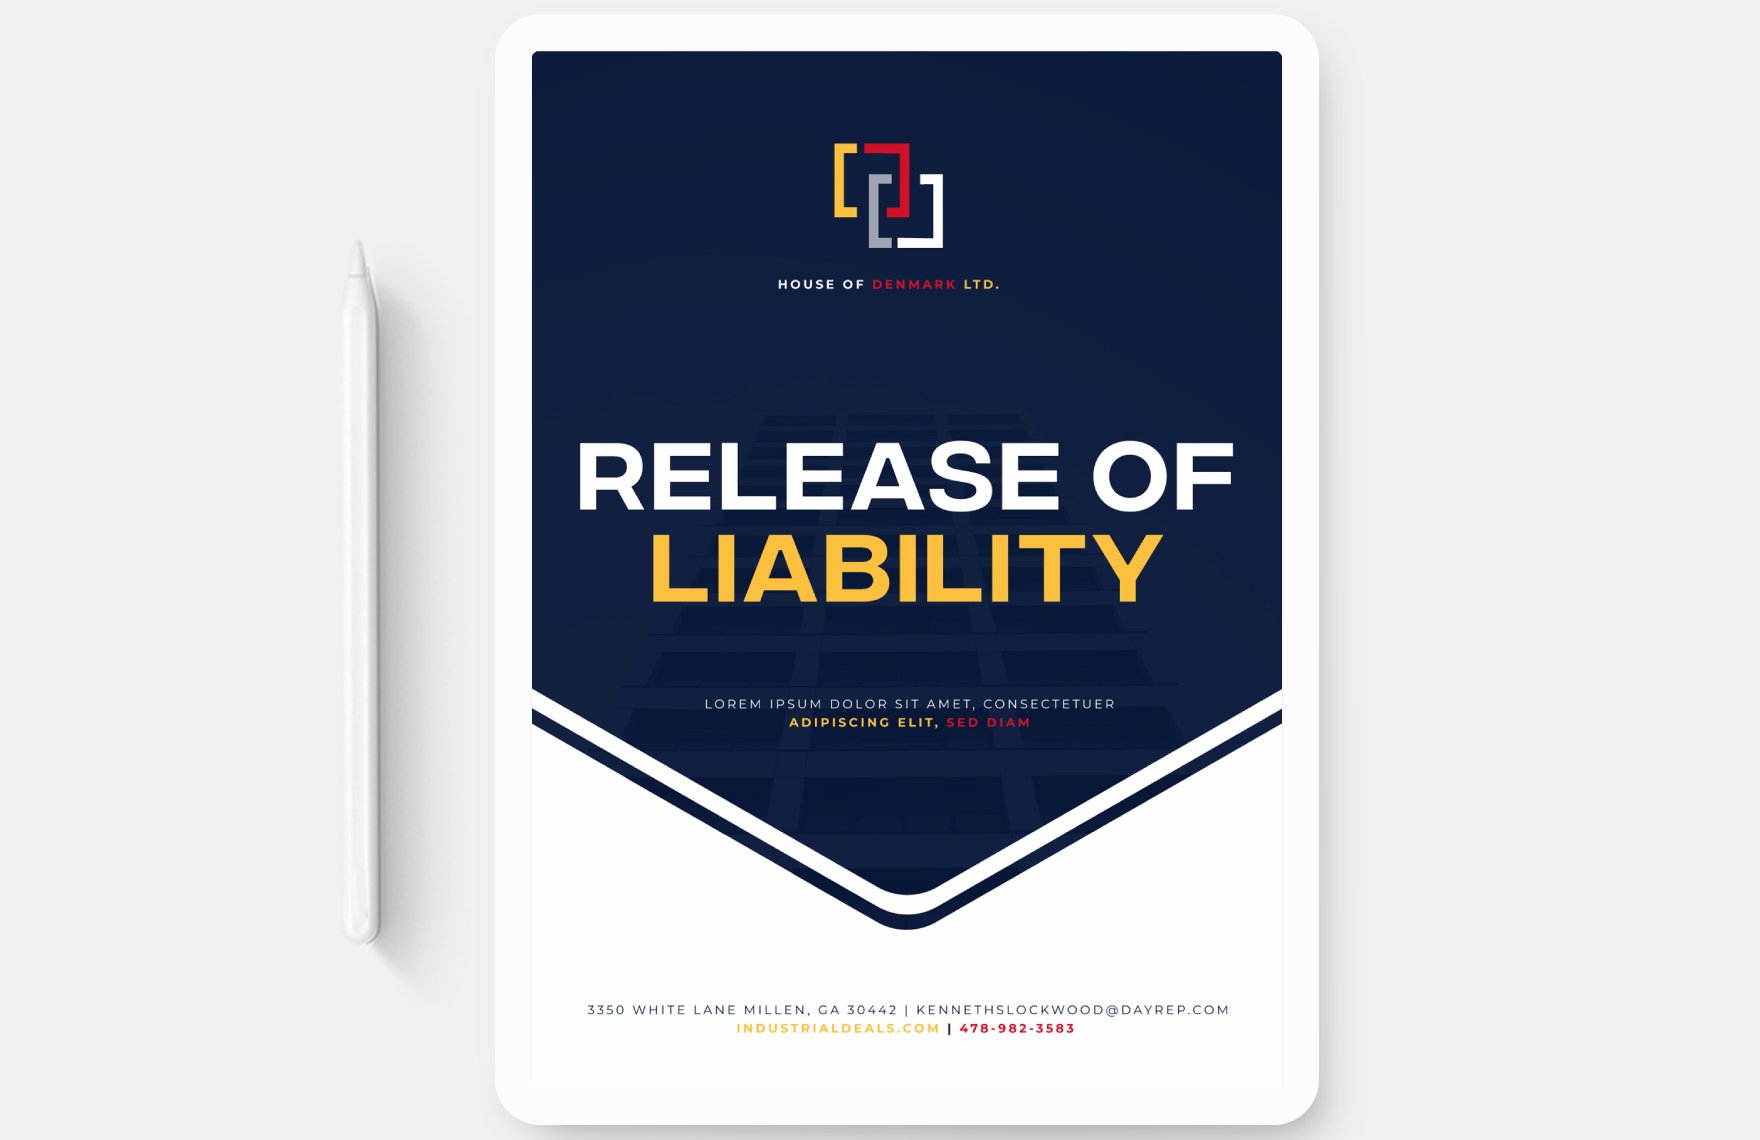 Release of Liability